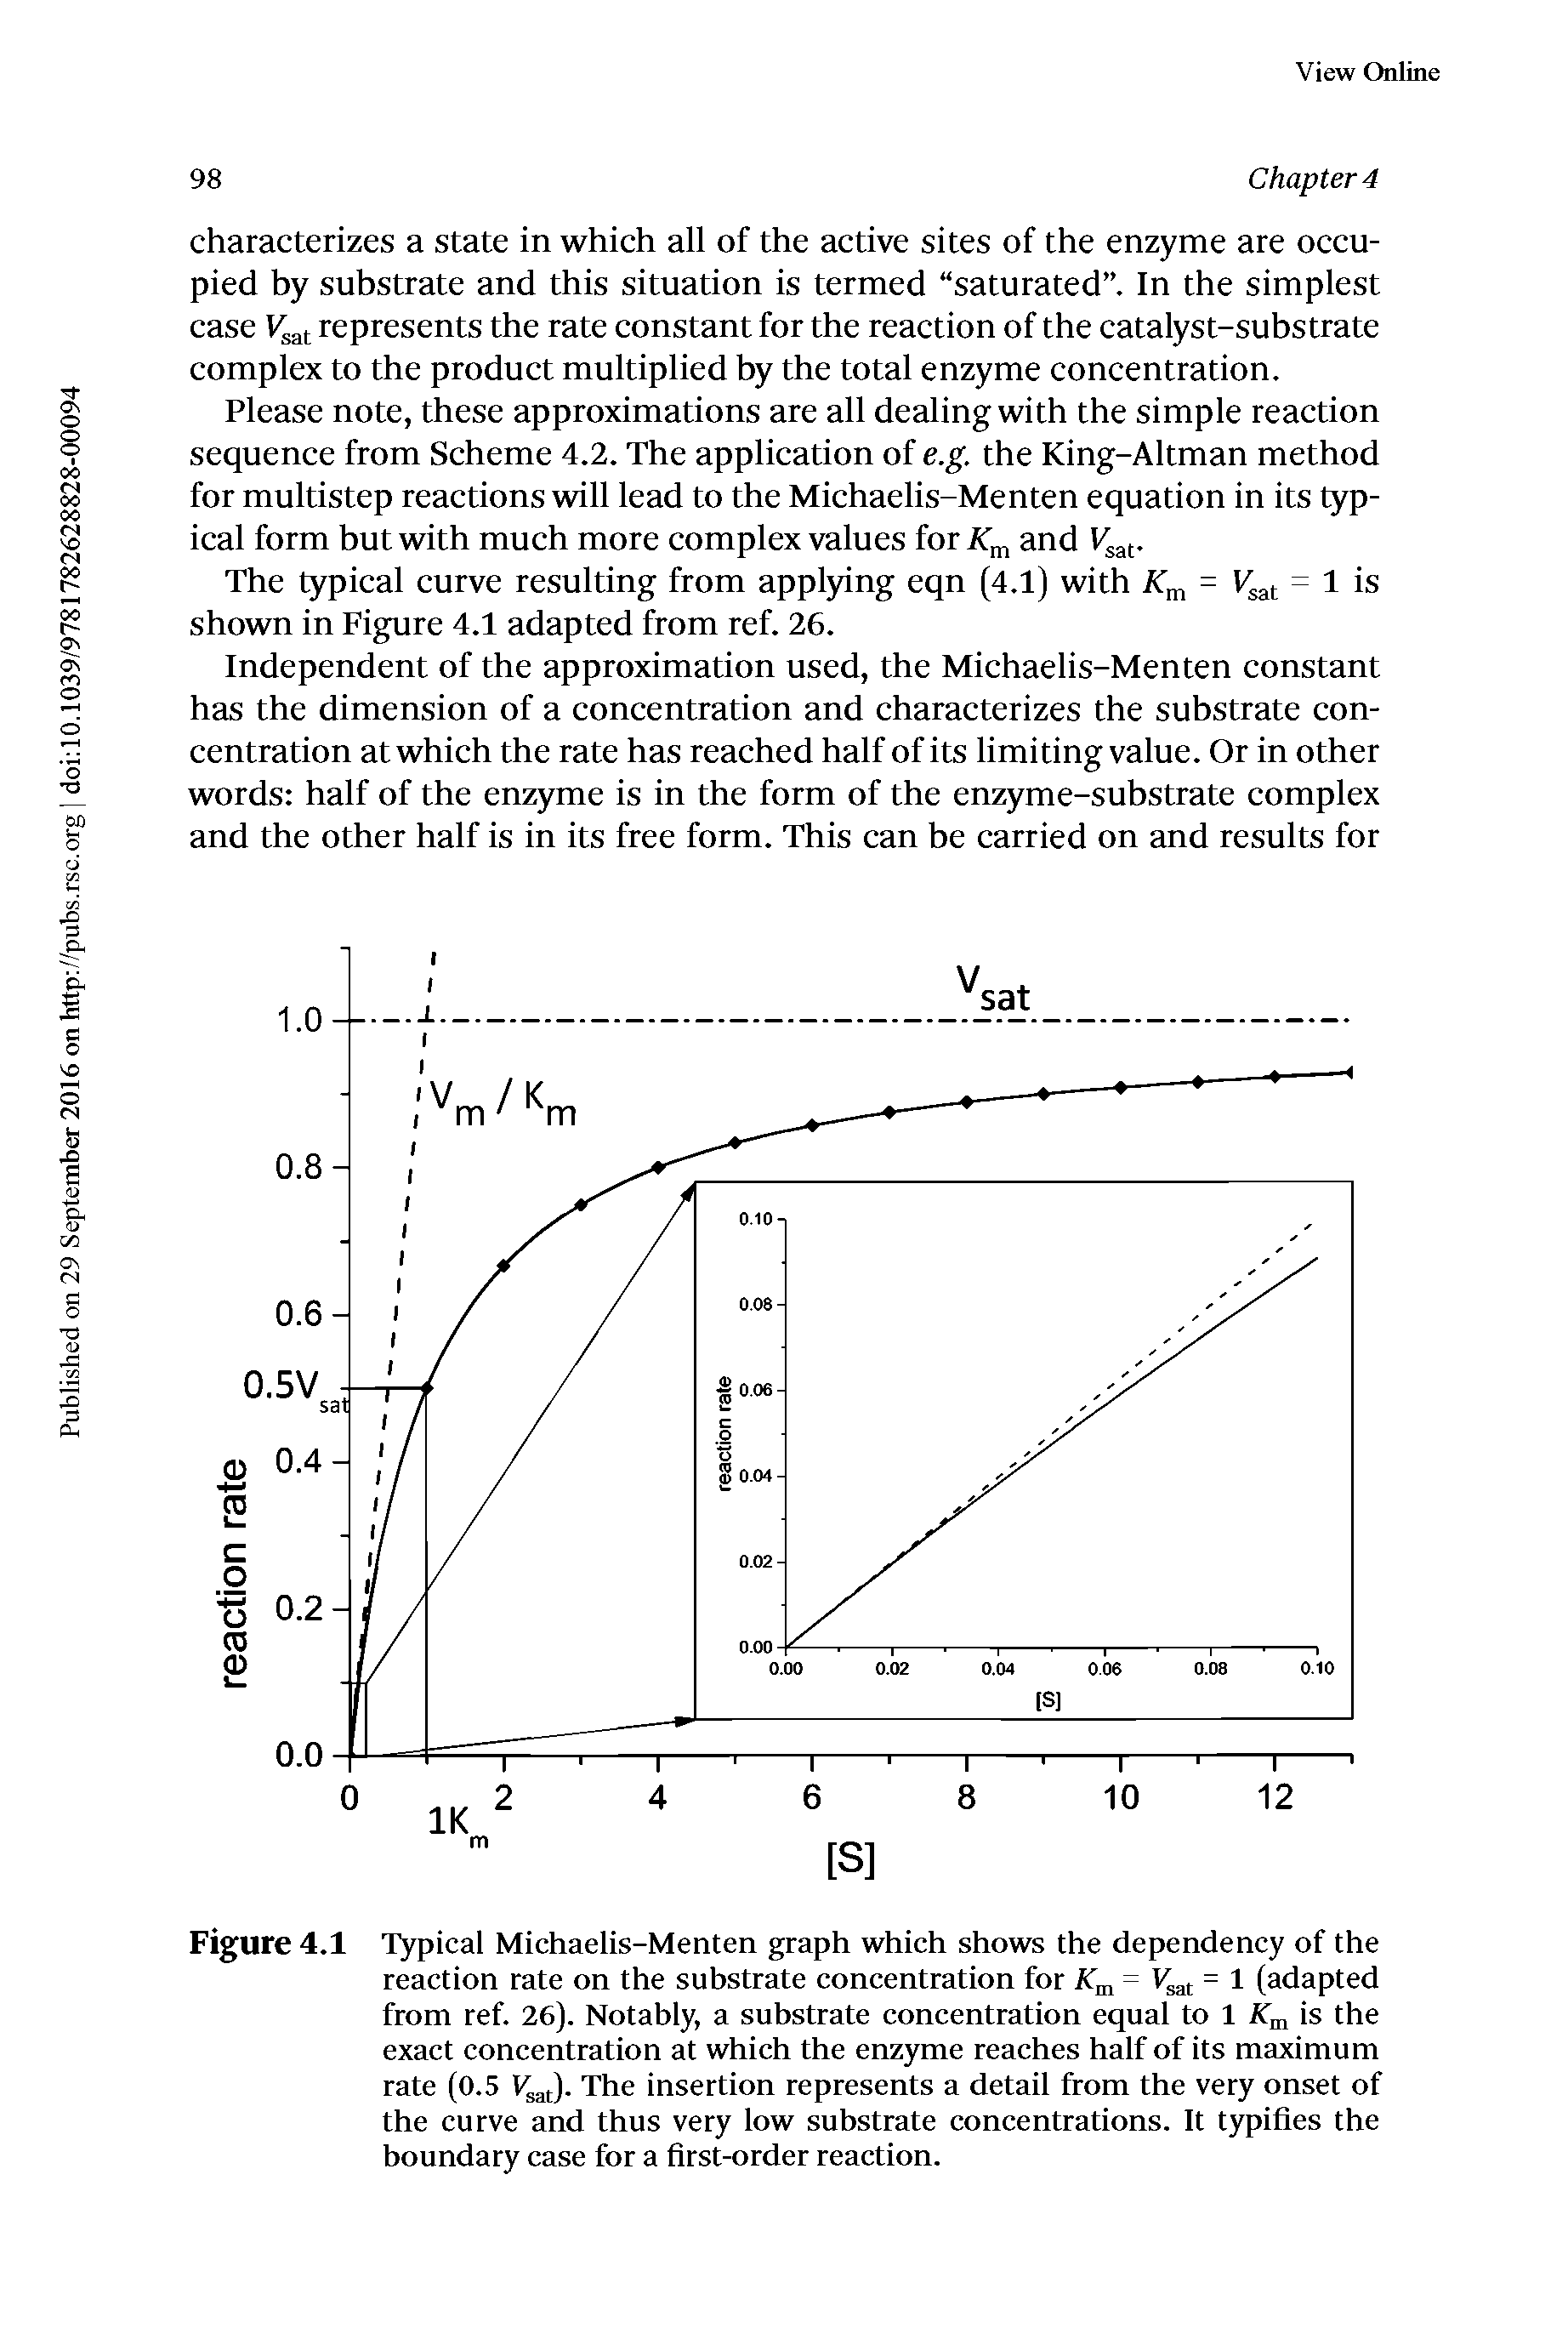 Figure 4.1 Typical Michaelis-Menten graph which shows the dependency of the reaction rate on the substrate concentration for = 1 (adapted...